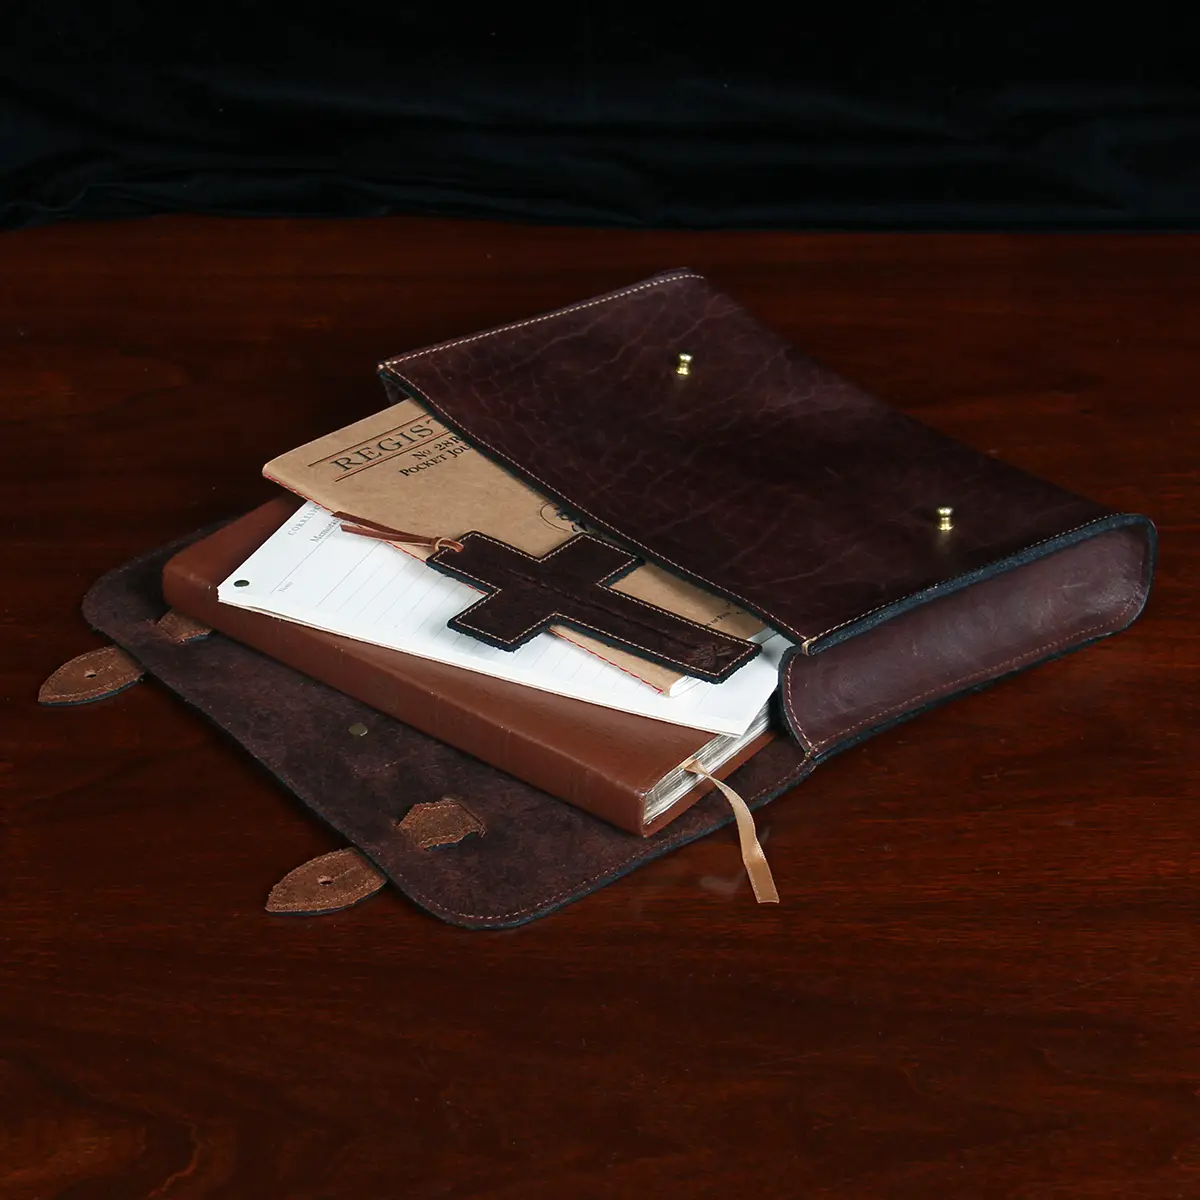 leather cross bookmark, journal, memo pad, and leather bible cover pocket